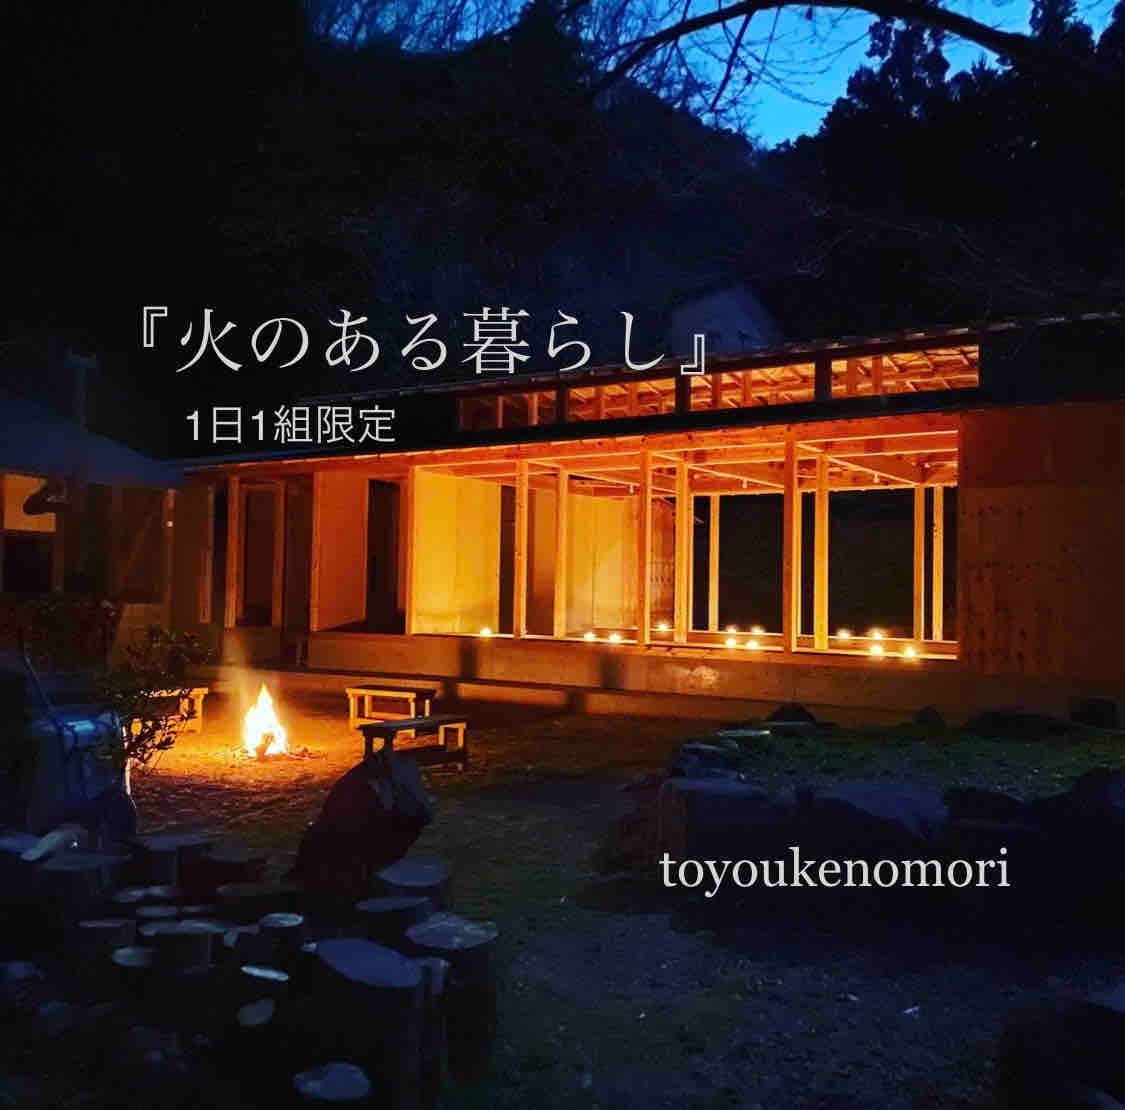 Toyoukenomori Experiential Guesthouse